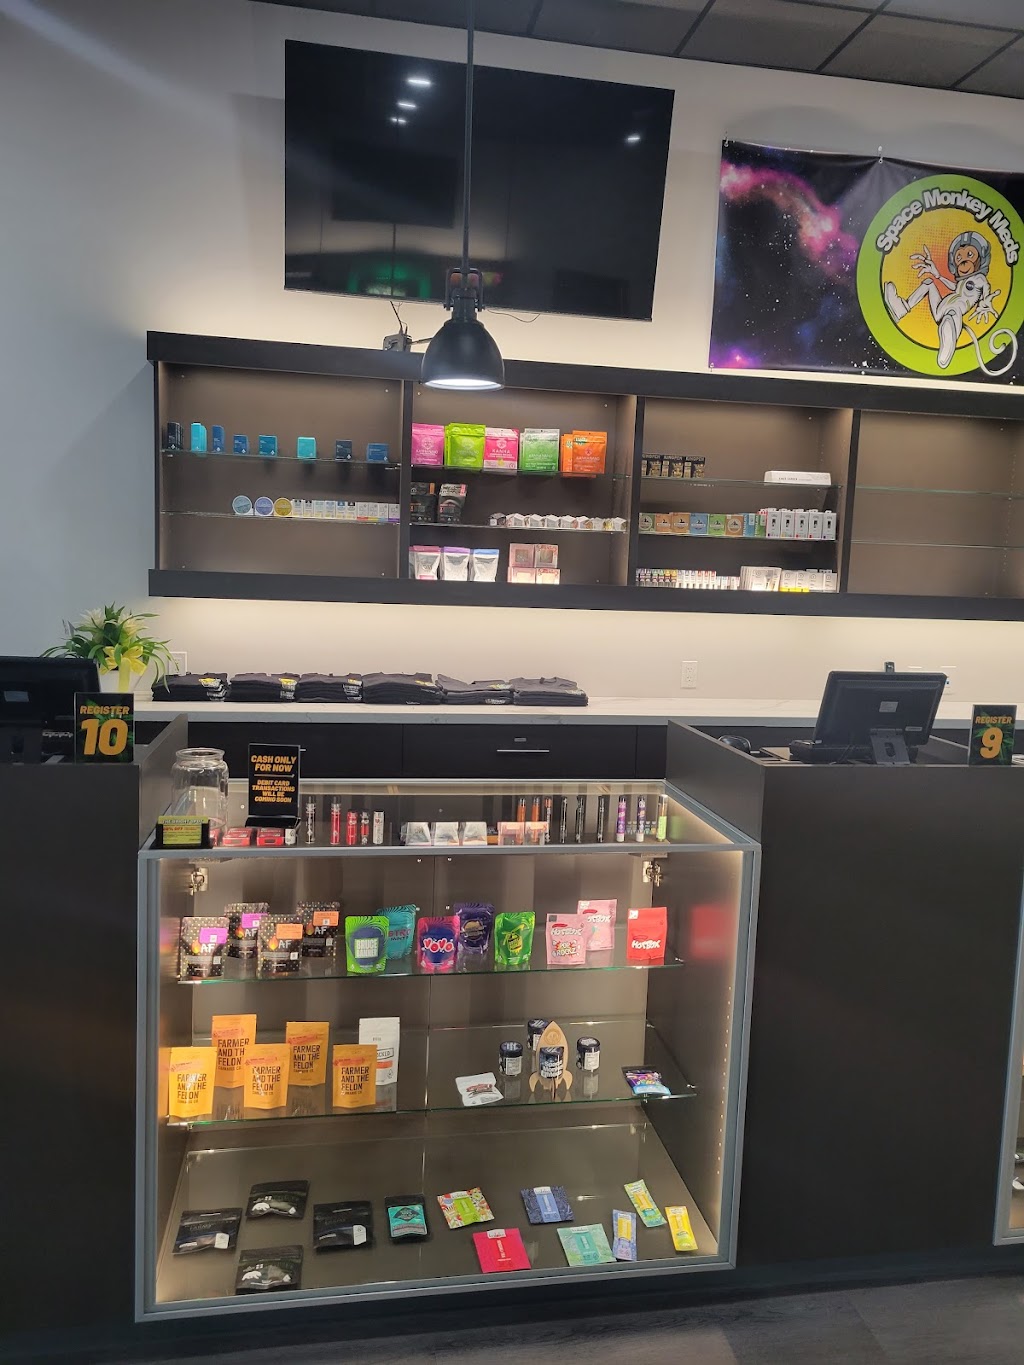 The Bright Spot Dispensary & Delivery | 1990 Walters Ct, Fairfield, CA 94533, USA | Phone: (707) 419-4538